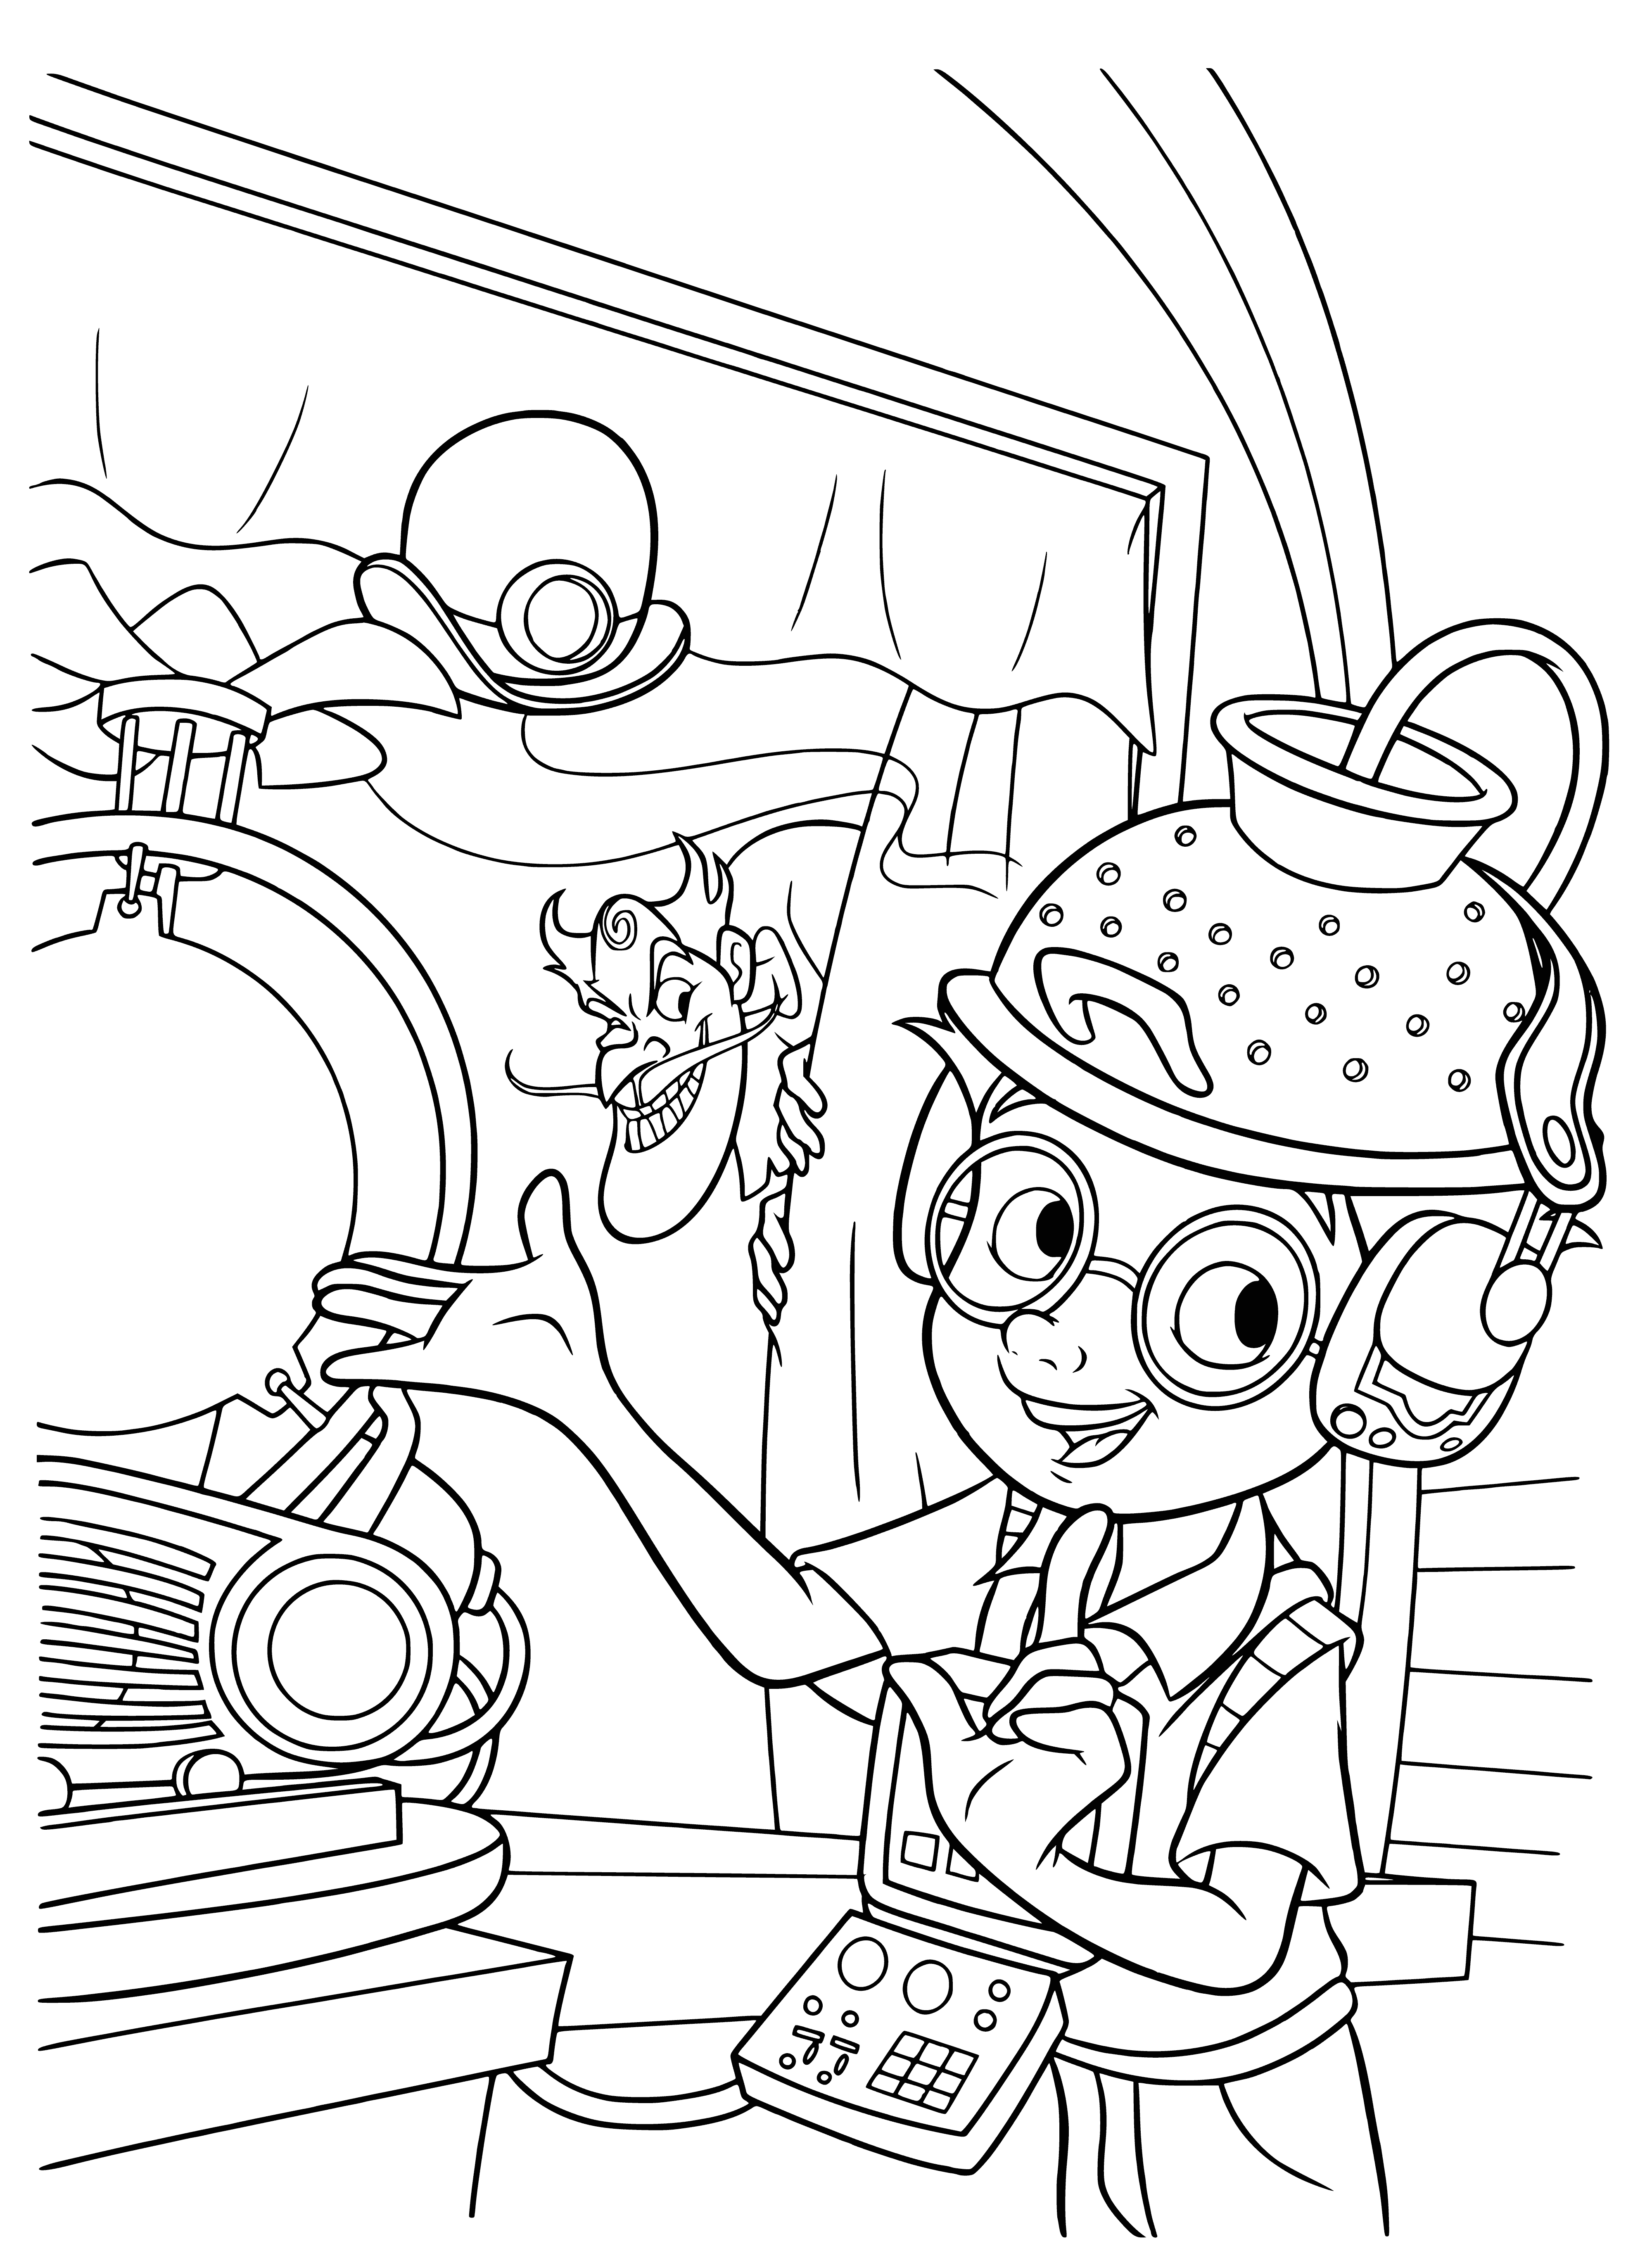 Lewis's invention coloring page